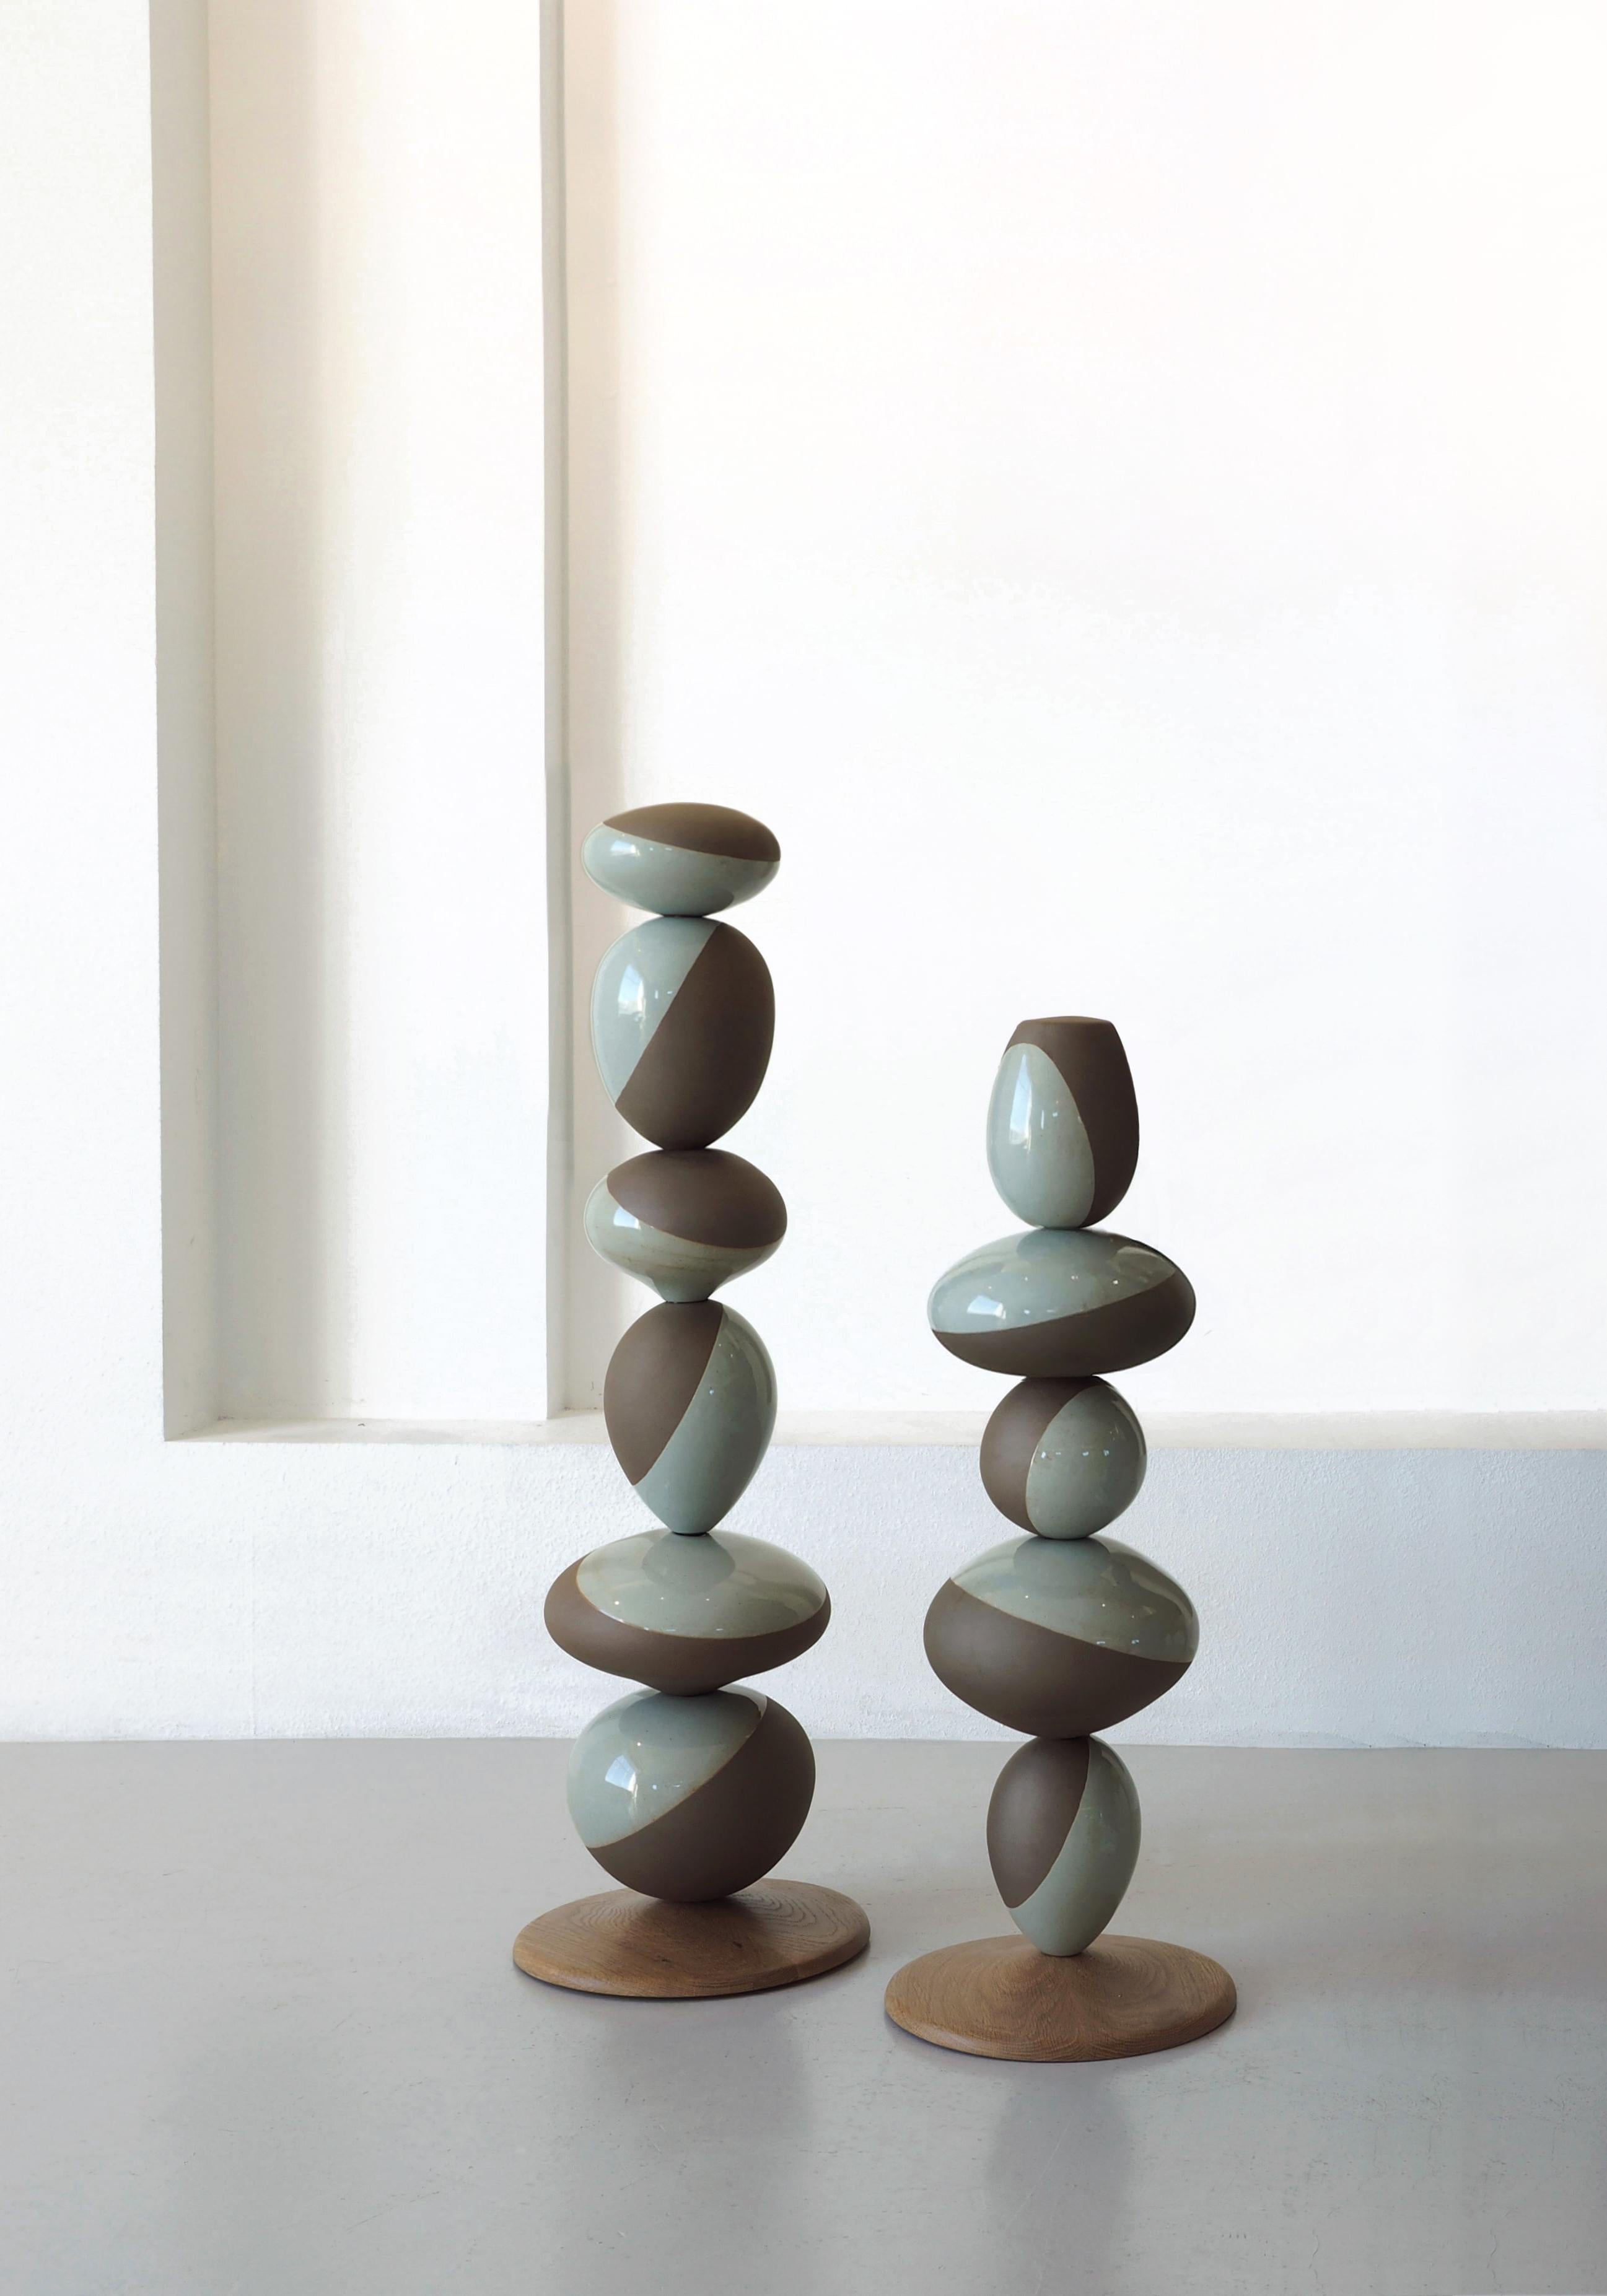 Large Stack Vessel is a stack sculpture made by Soo Joo in Korean ceramic stoneware and celadon glaze. Its timeless form expresses the ideal ratio and formal balance through a variety of vessel forms stacked in harmony. The artist reimagines the